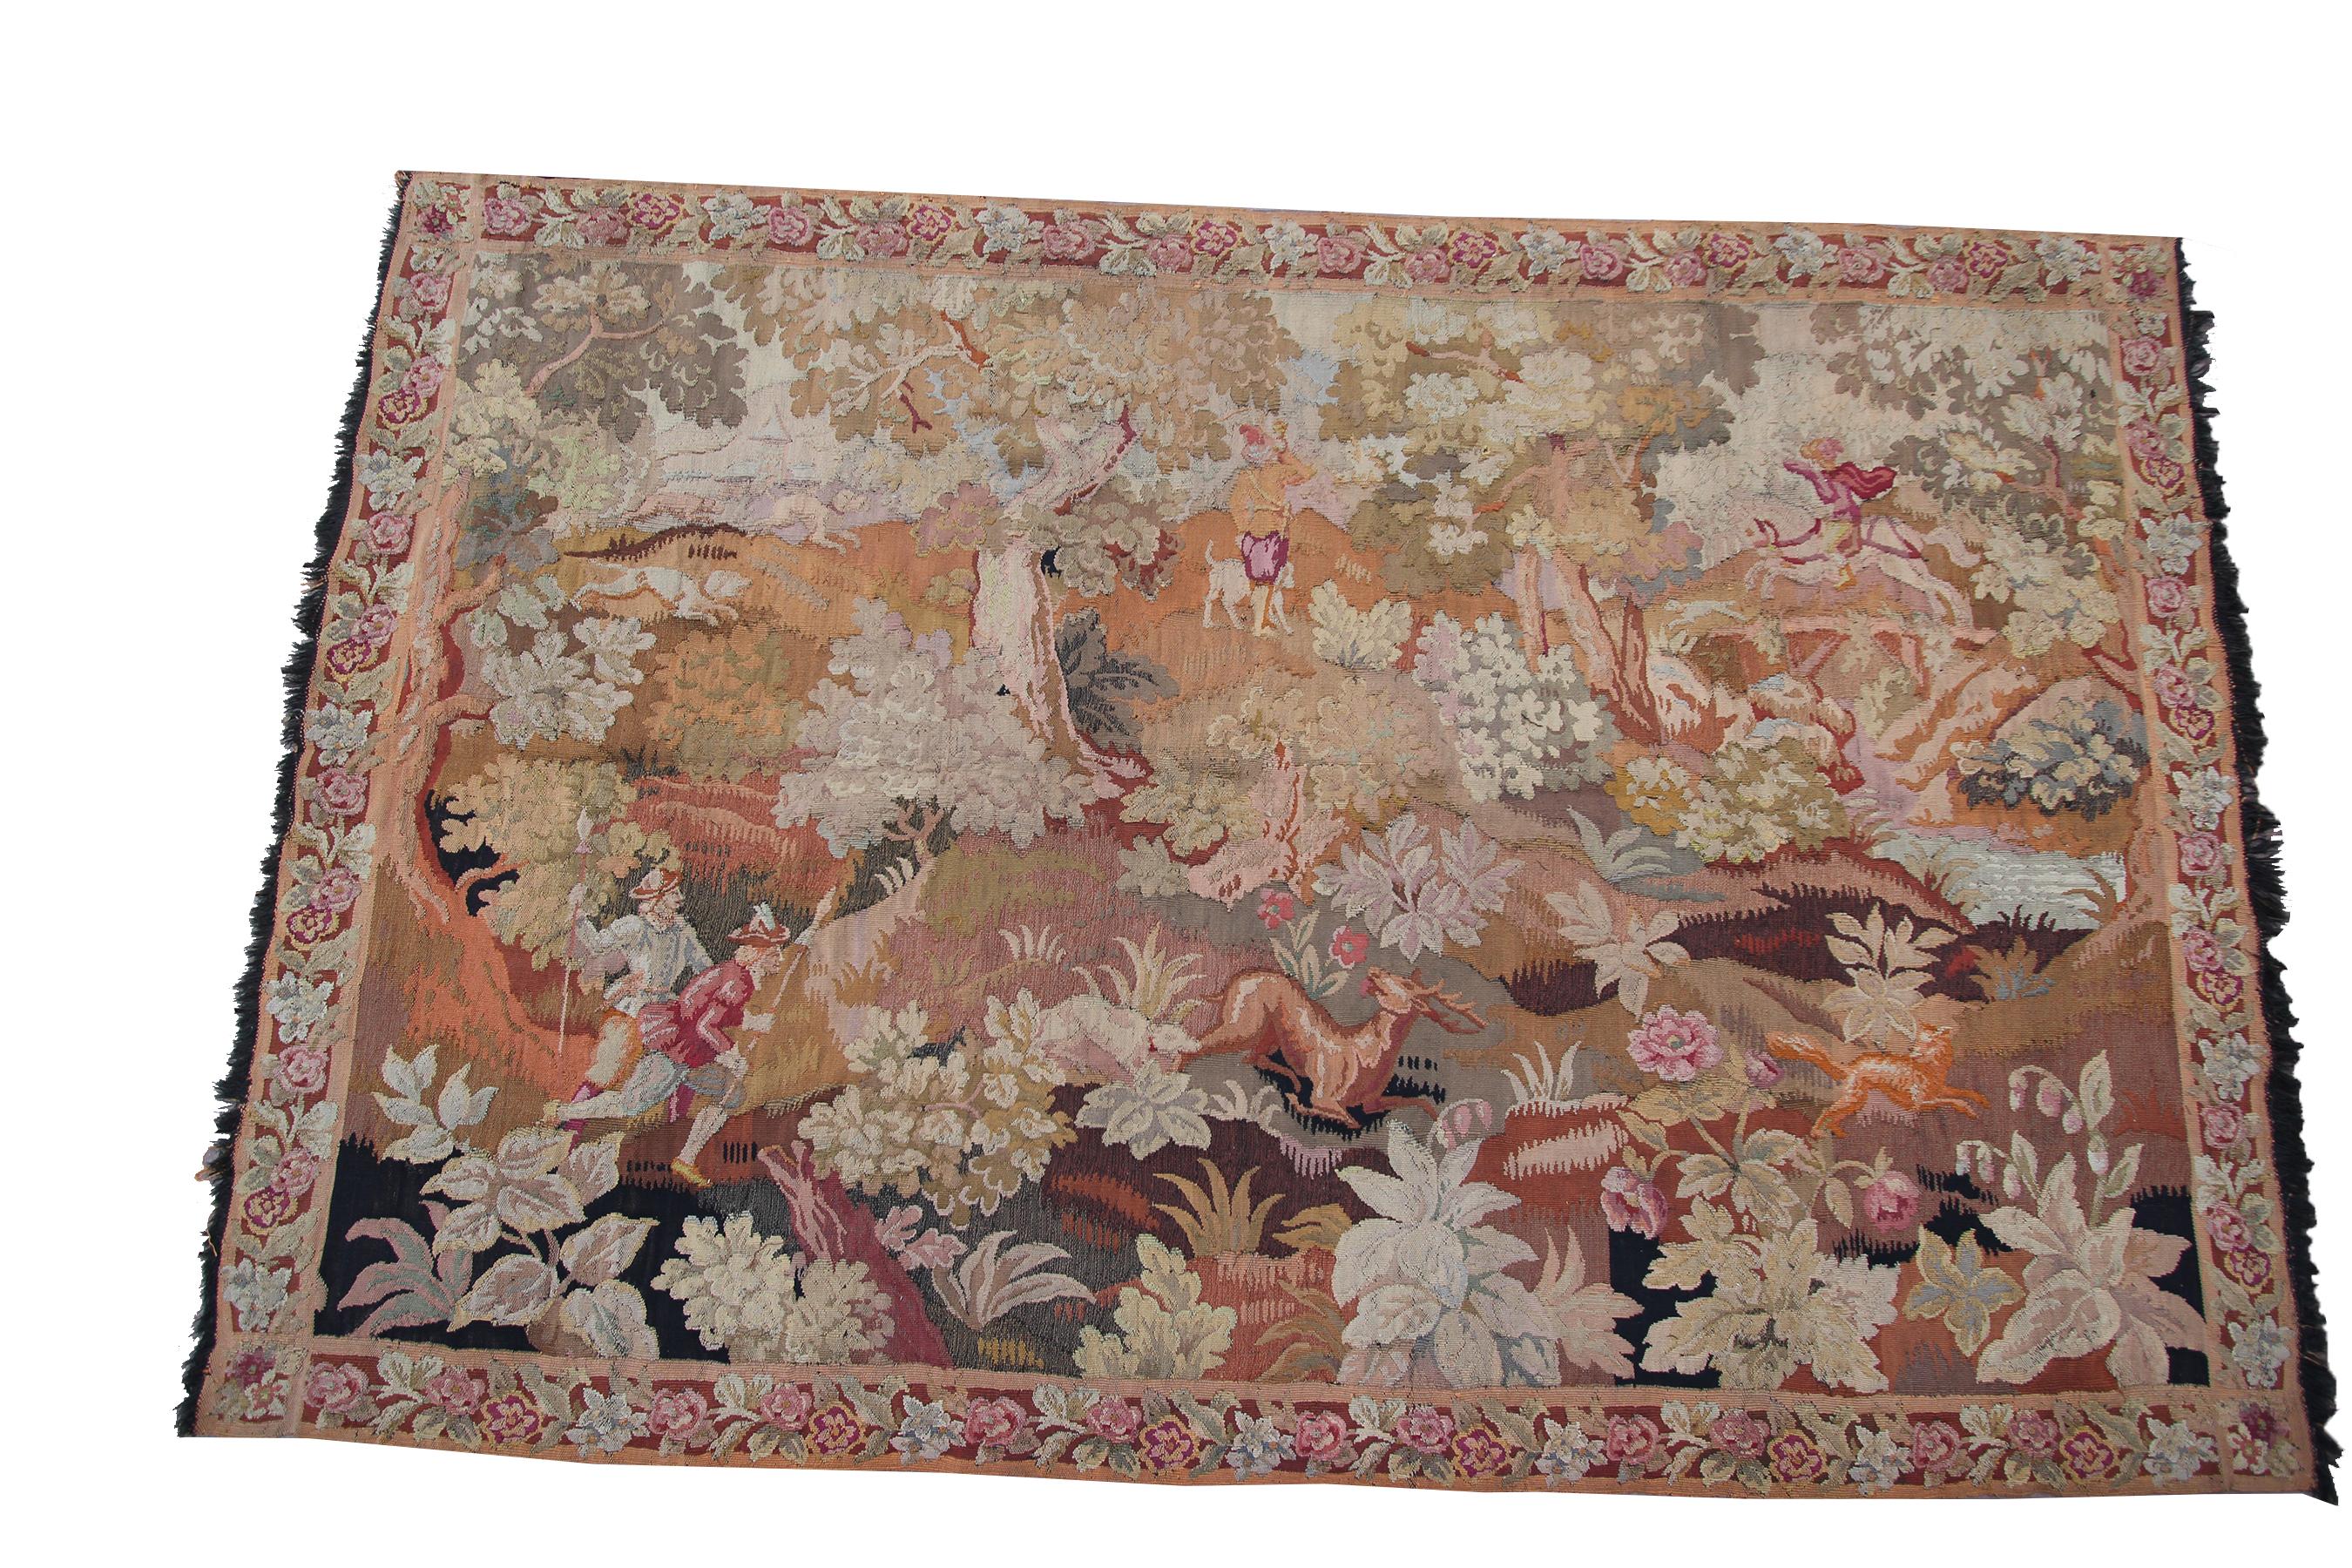 French Provincial Antique Tapestry Antique French Tapestry Large Tapestry Verdure Tapestry, 1920